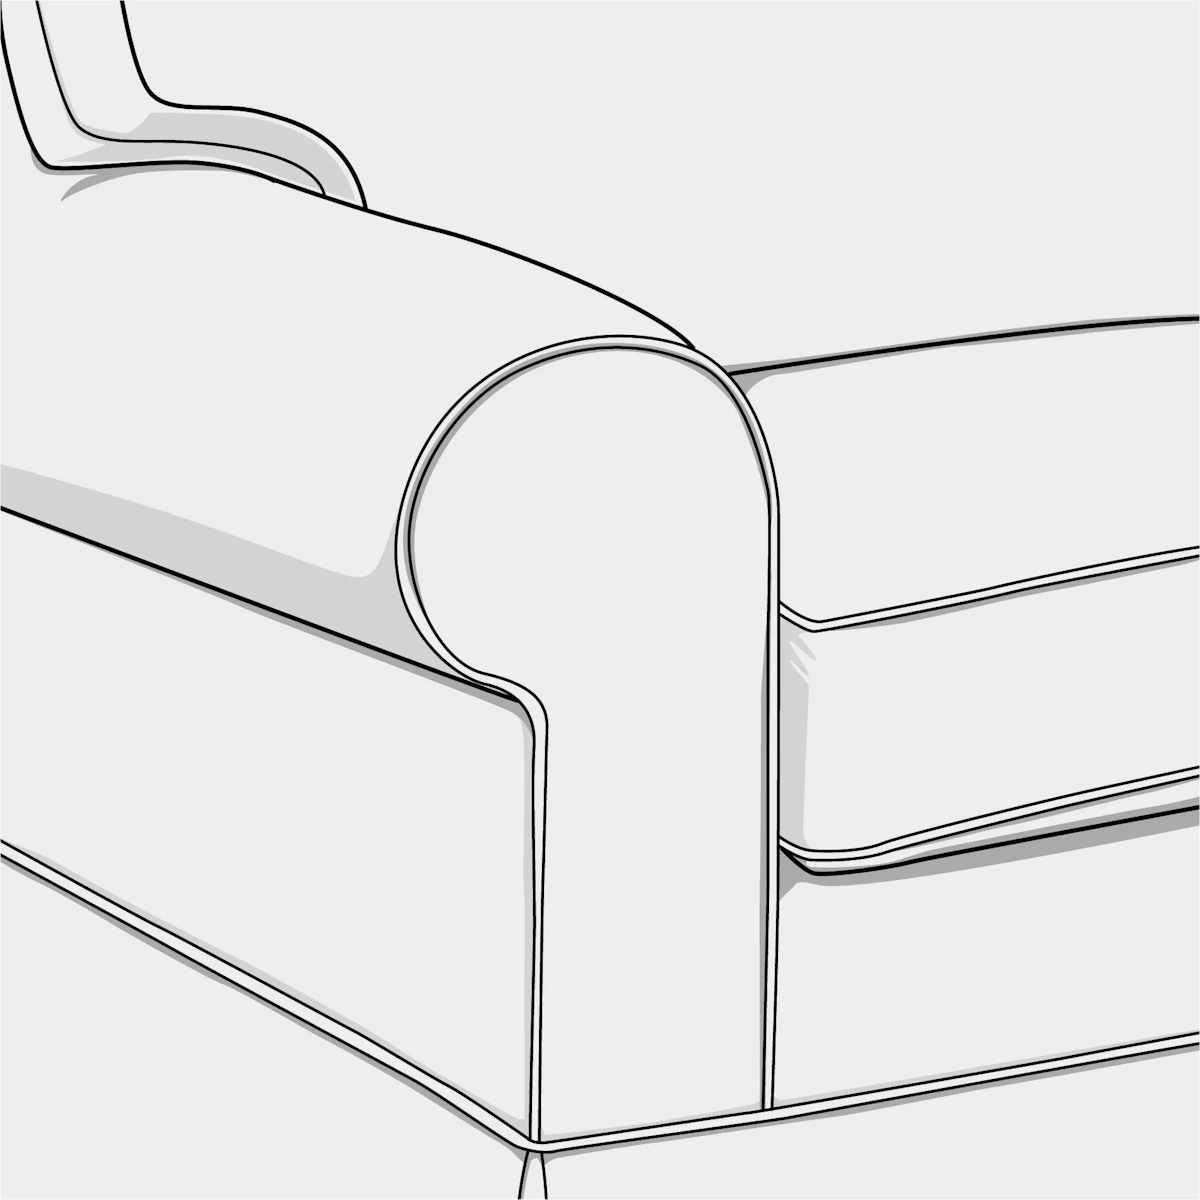 Upholstery illustration featuring piping trim on luxury sofa